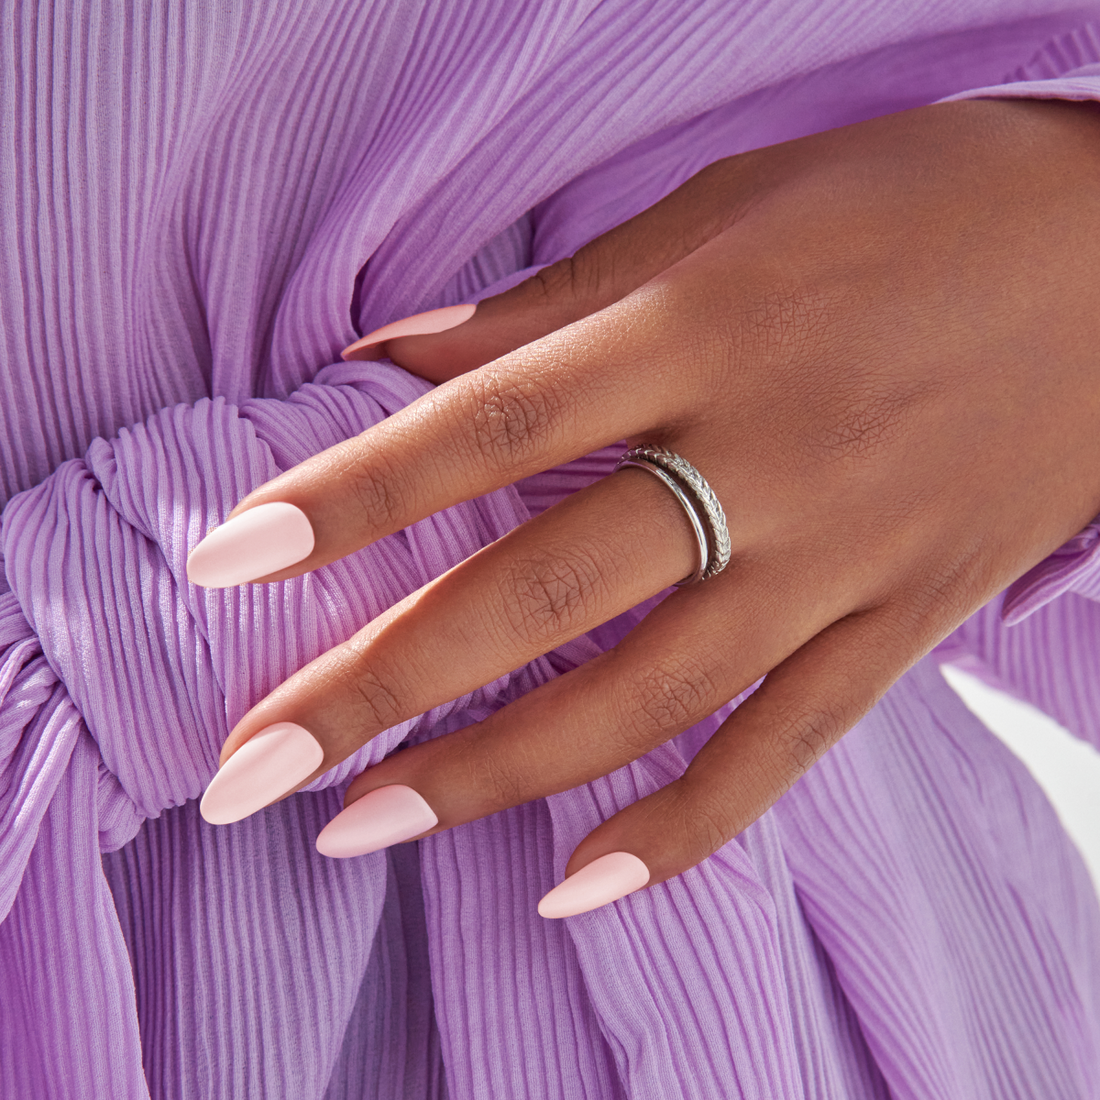 imPRESS nails in almond shapes featuring a light pink color